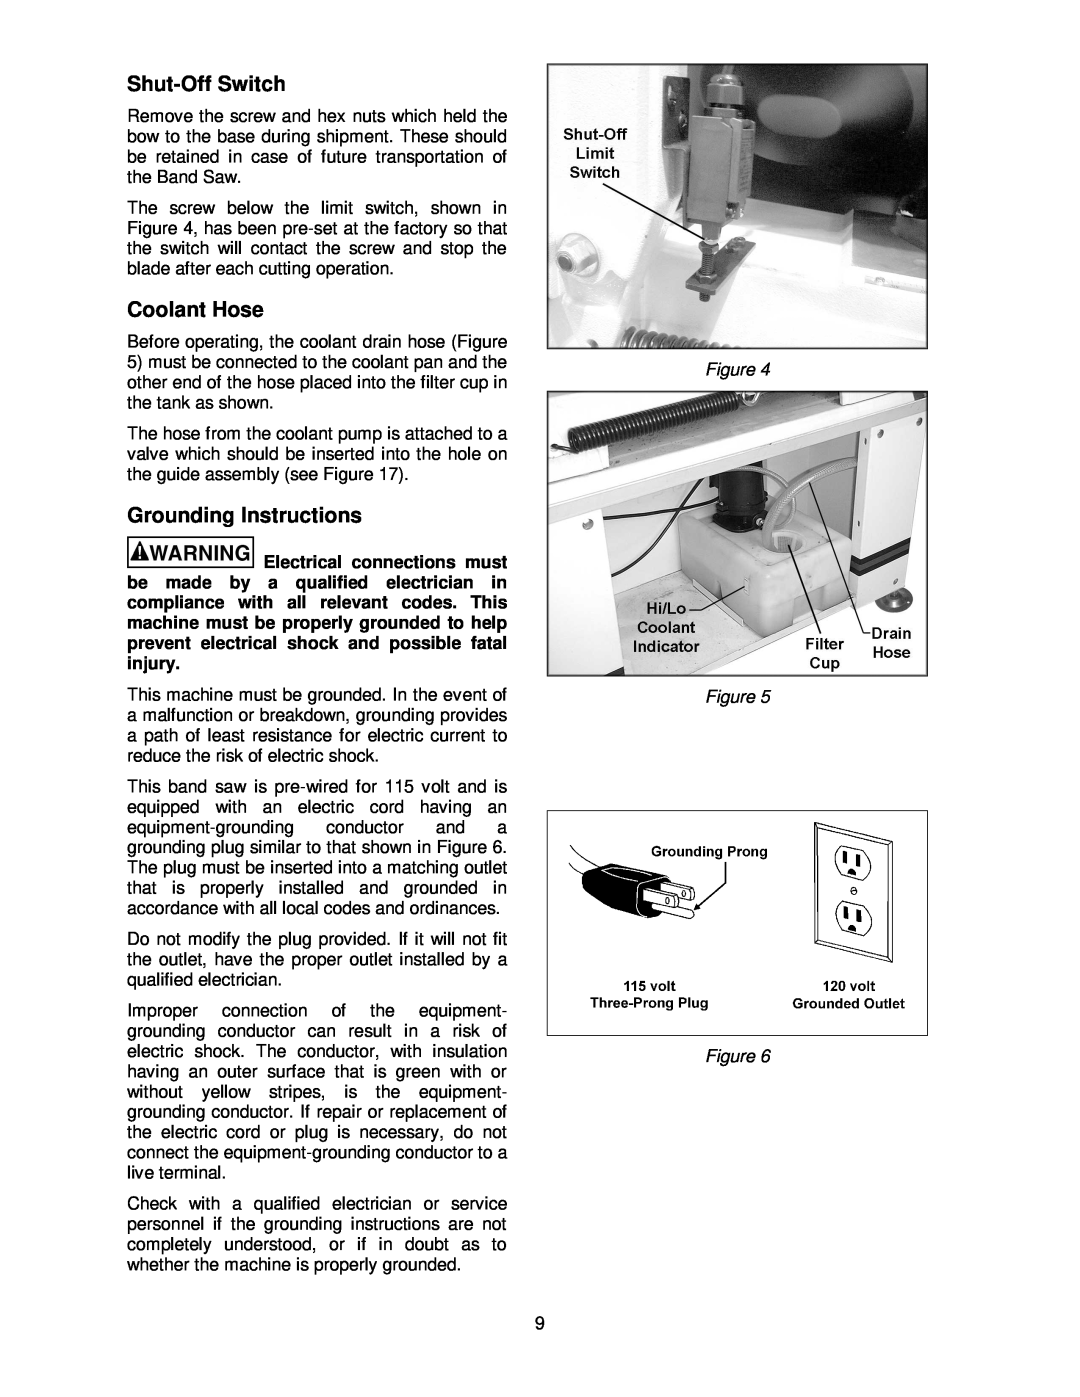 Jet Tools HBS-814GH operating instructions Shut-Off Switch, Coolant Hose, Grounding Instructions 